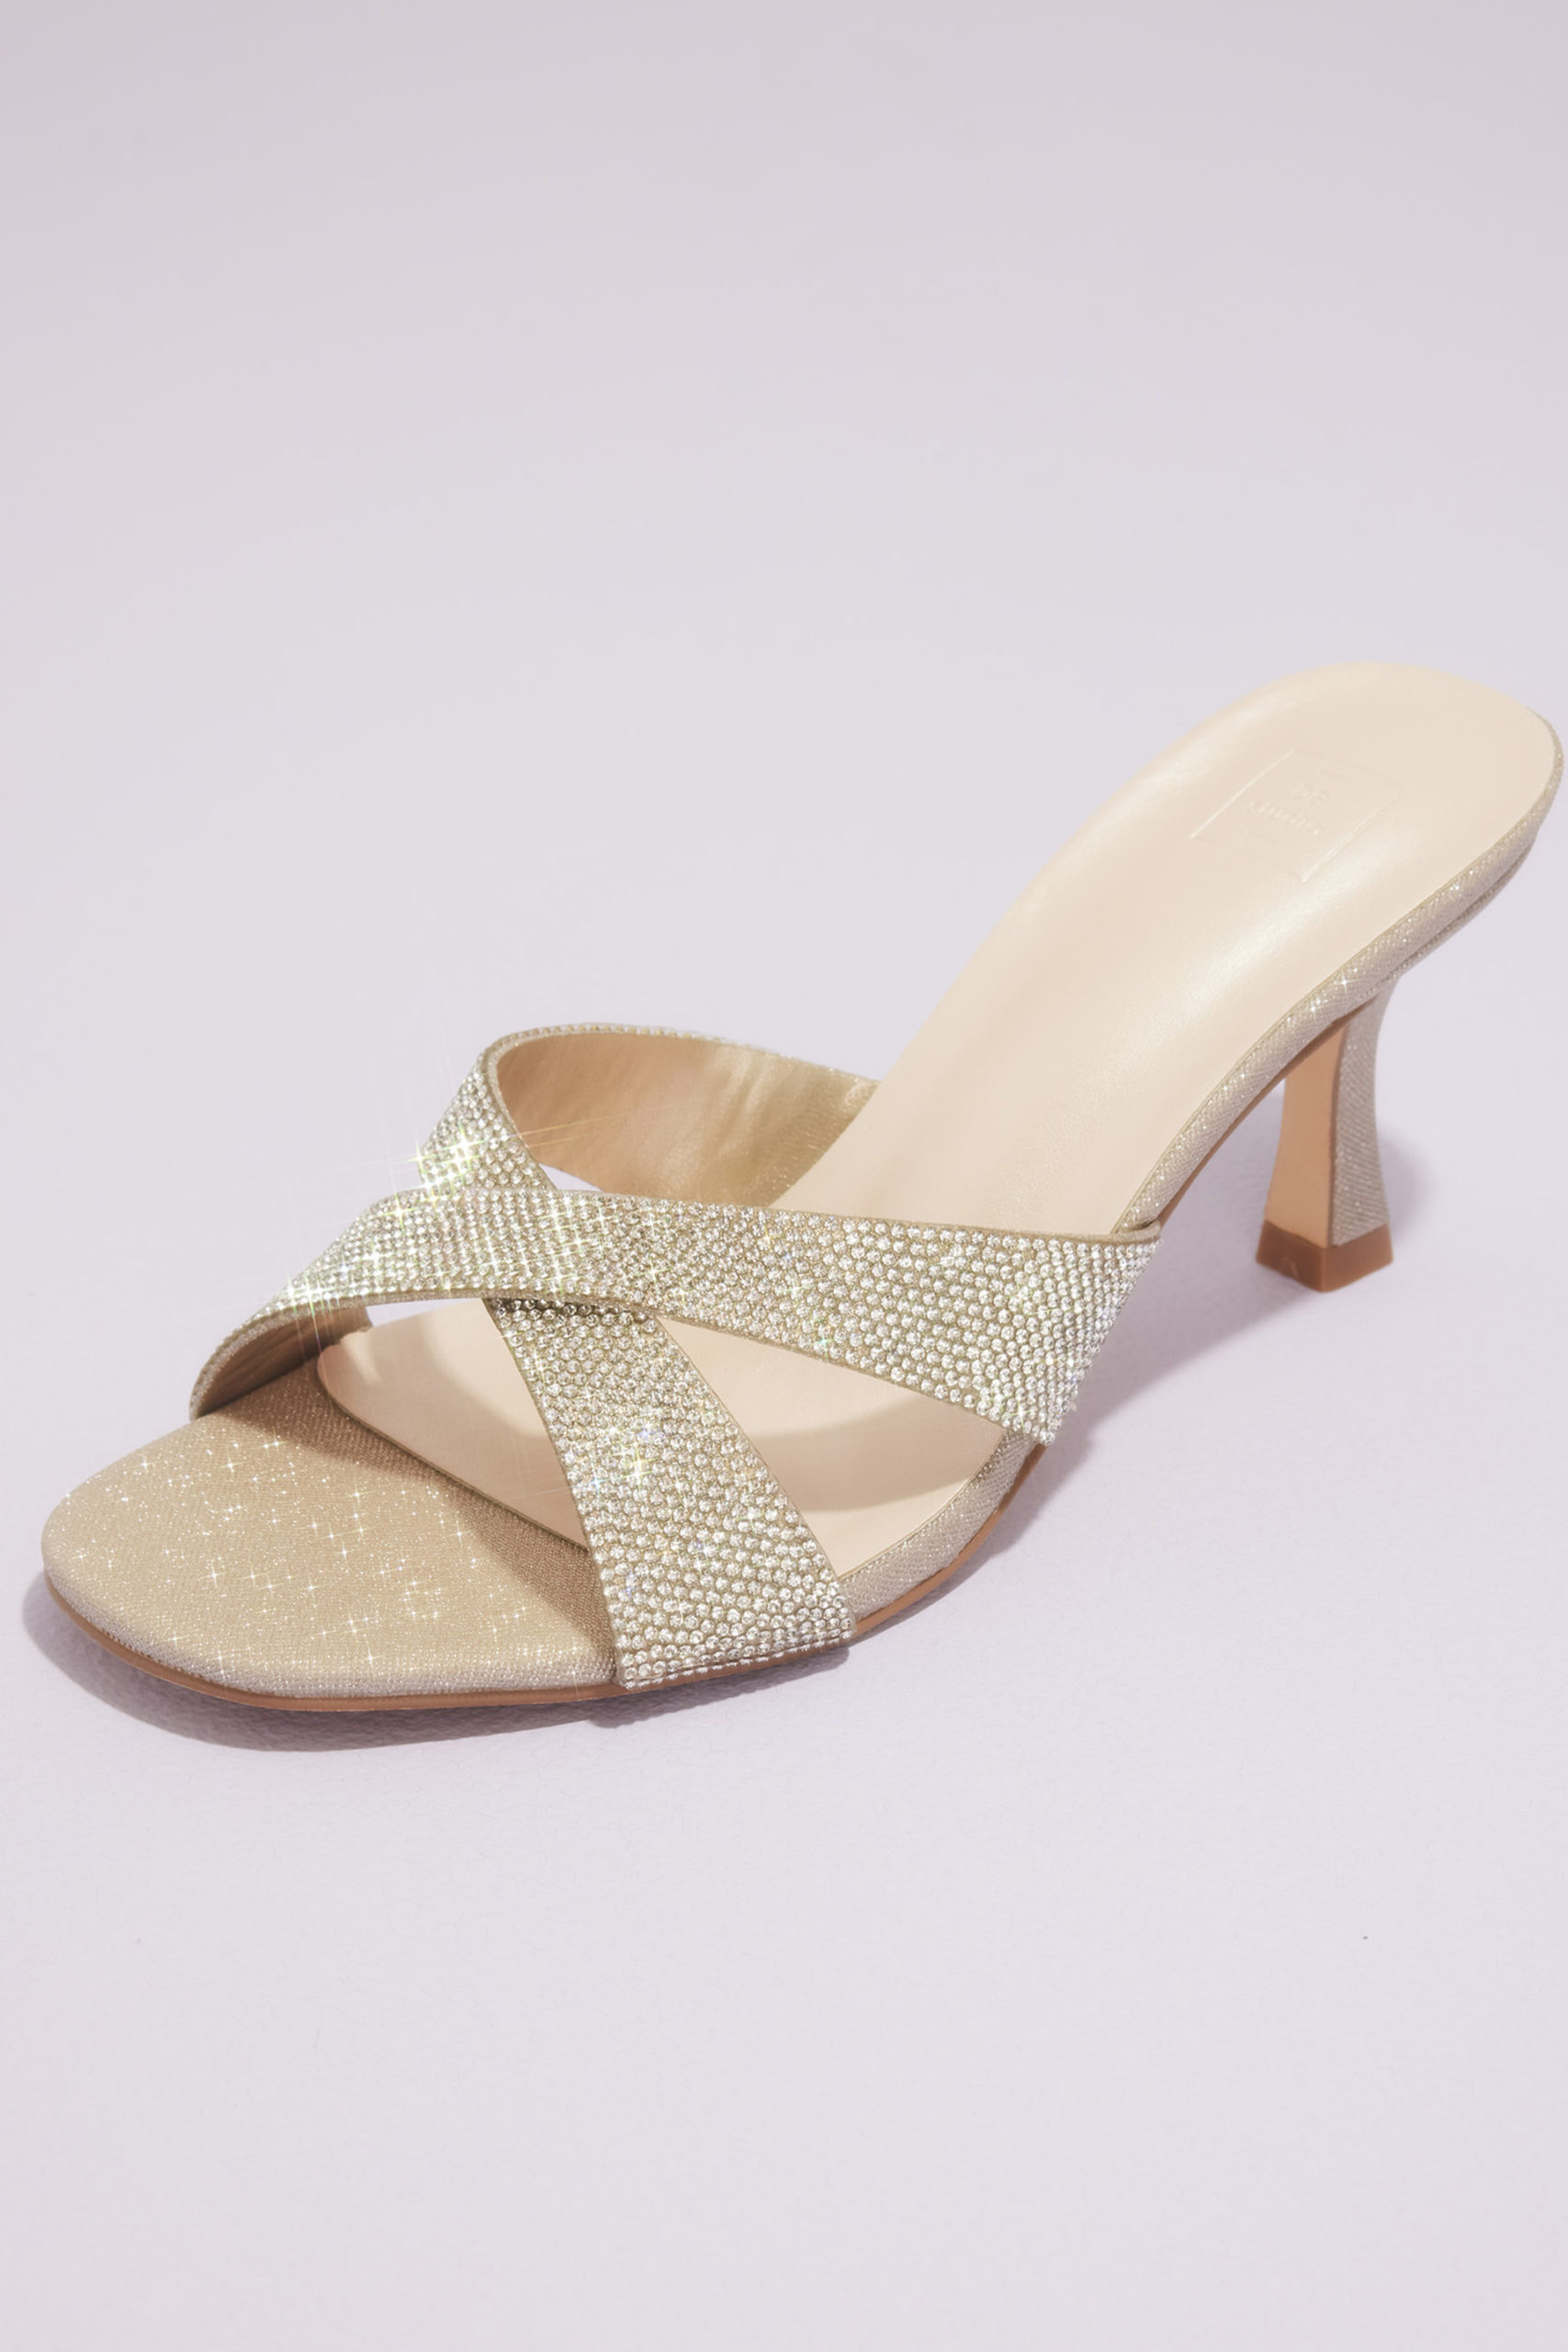 sparkly wedding mule shoe for the bride